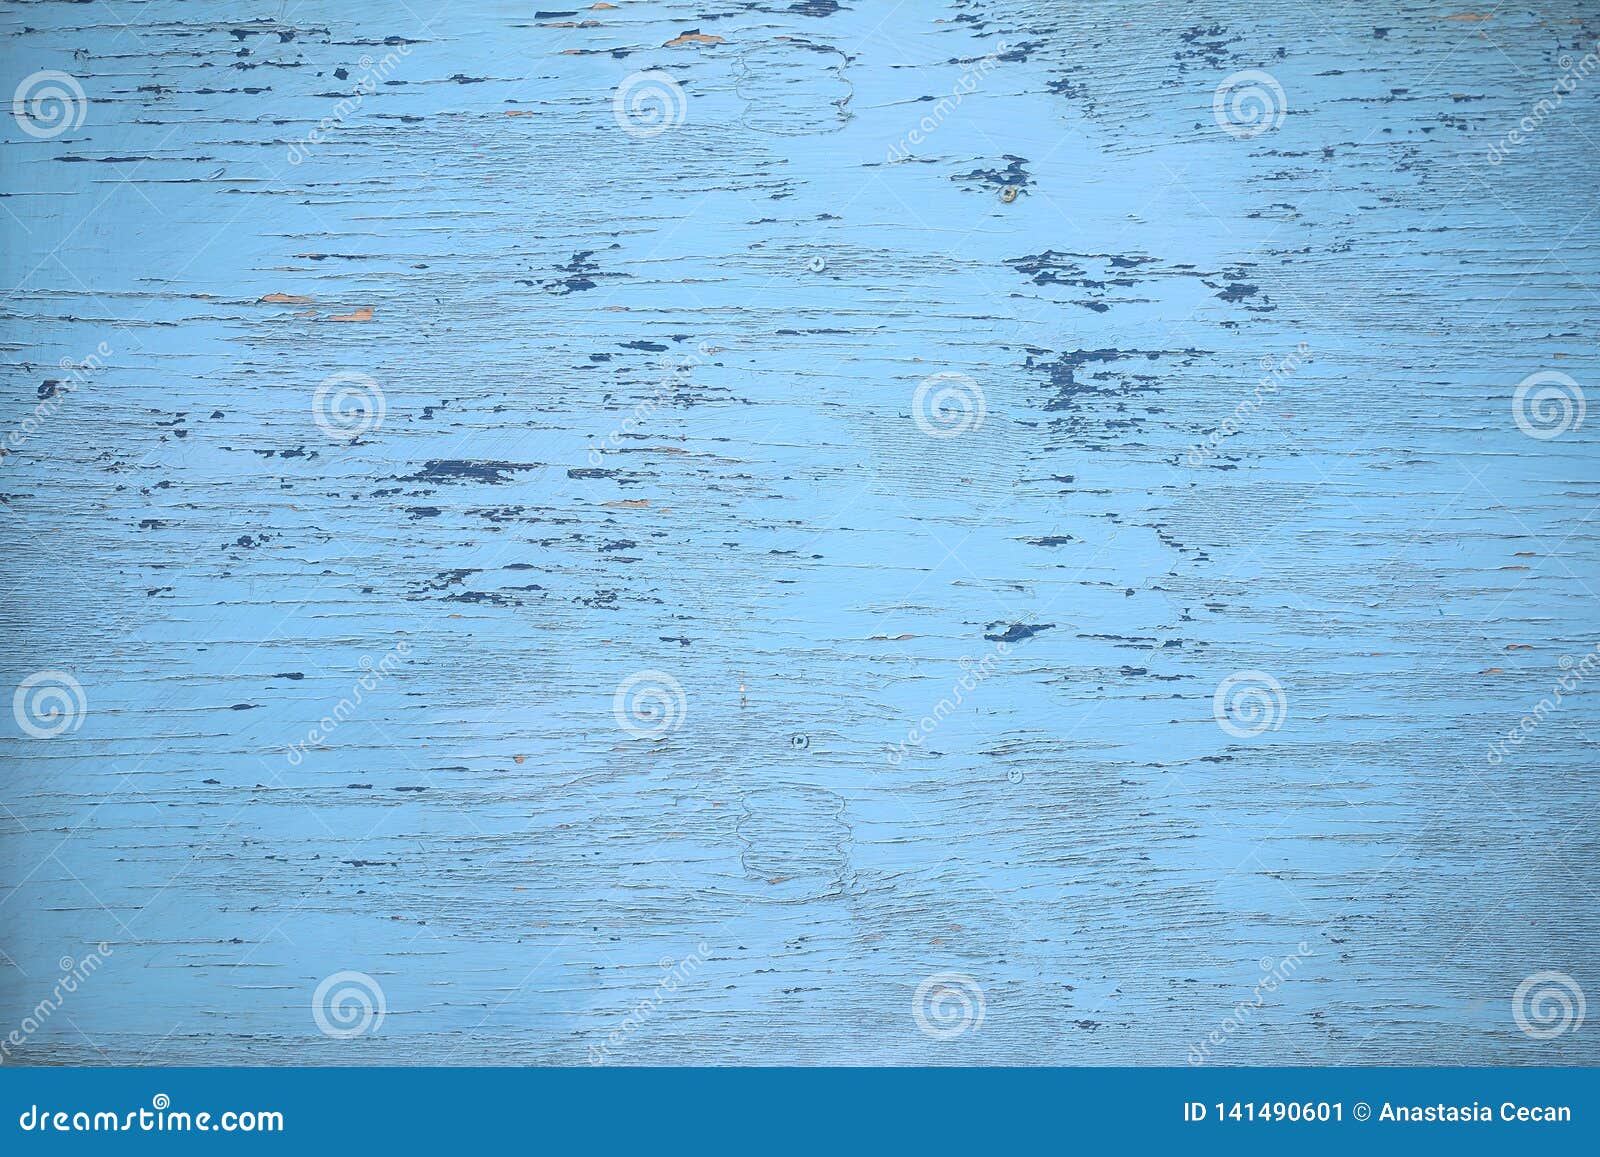 Blue Rustic Wood Texture Stock Image Image Of Rustic 141490601